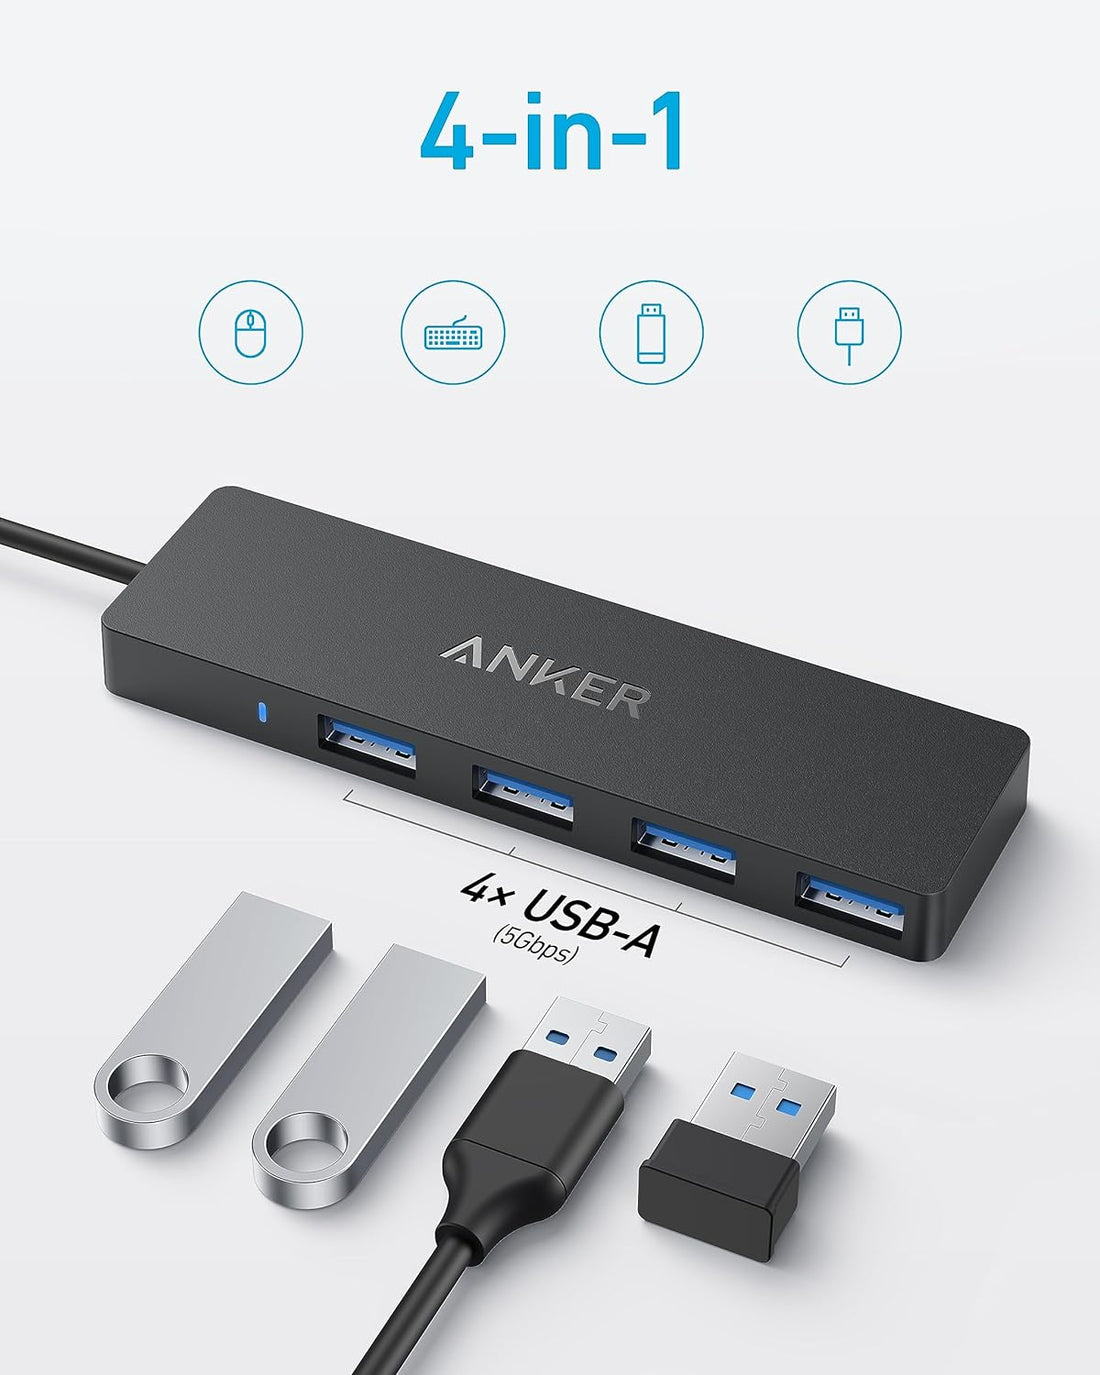 Anker USB C Hub, 4 Ports USB 3.0 Data Hub with 5Gbps Data Transfer, 0.7ft Extended Cable[Charging Not Supported], USB C Splitter for Type C MacBook, Mac Pro, iMac, Surface, Flash Drive, Mobile HDD